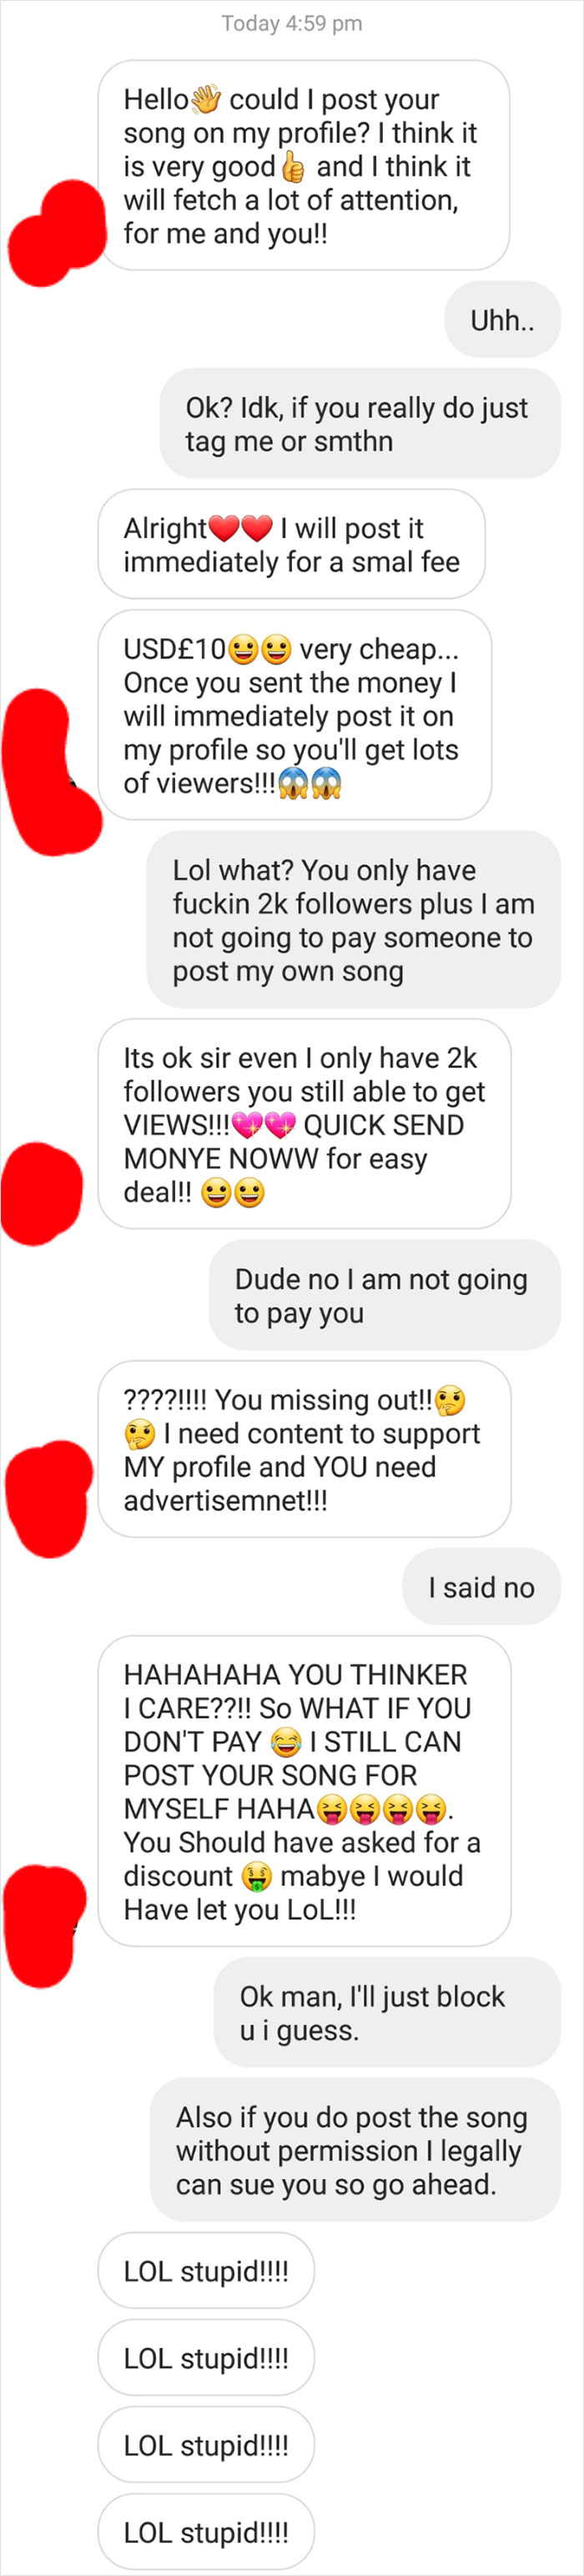 Yeah I Need Exposure, But Not This Way, Also I Think The Amount Of Emojis He Used Is Scary